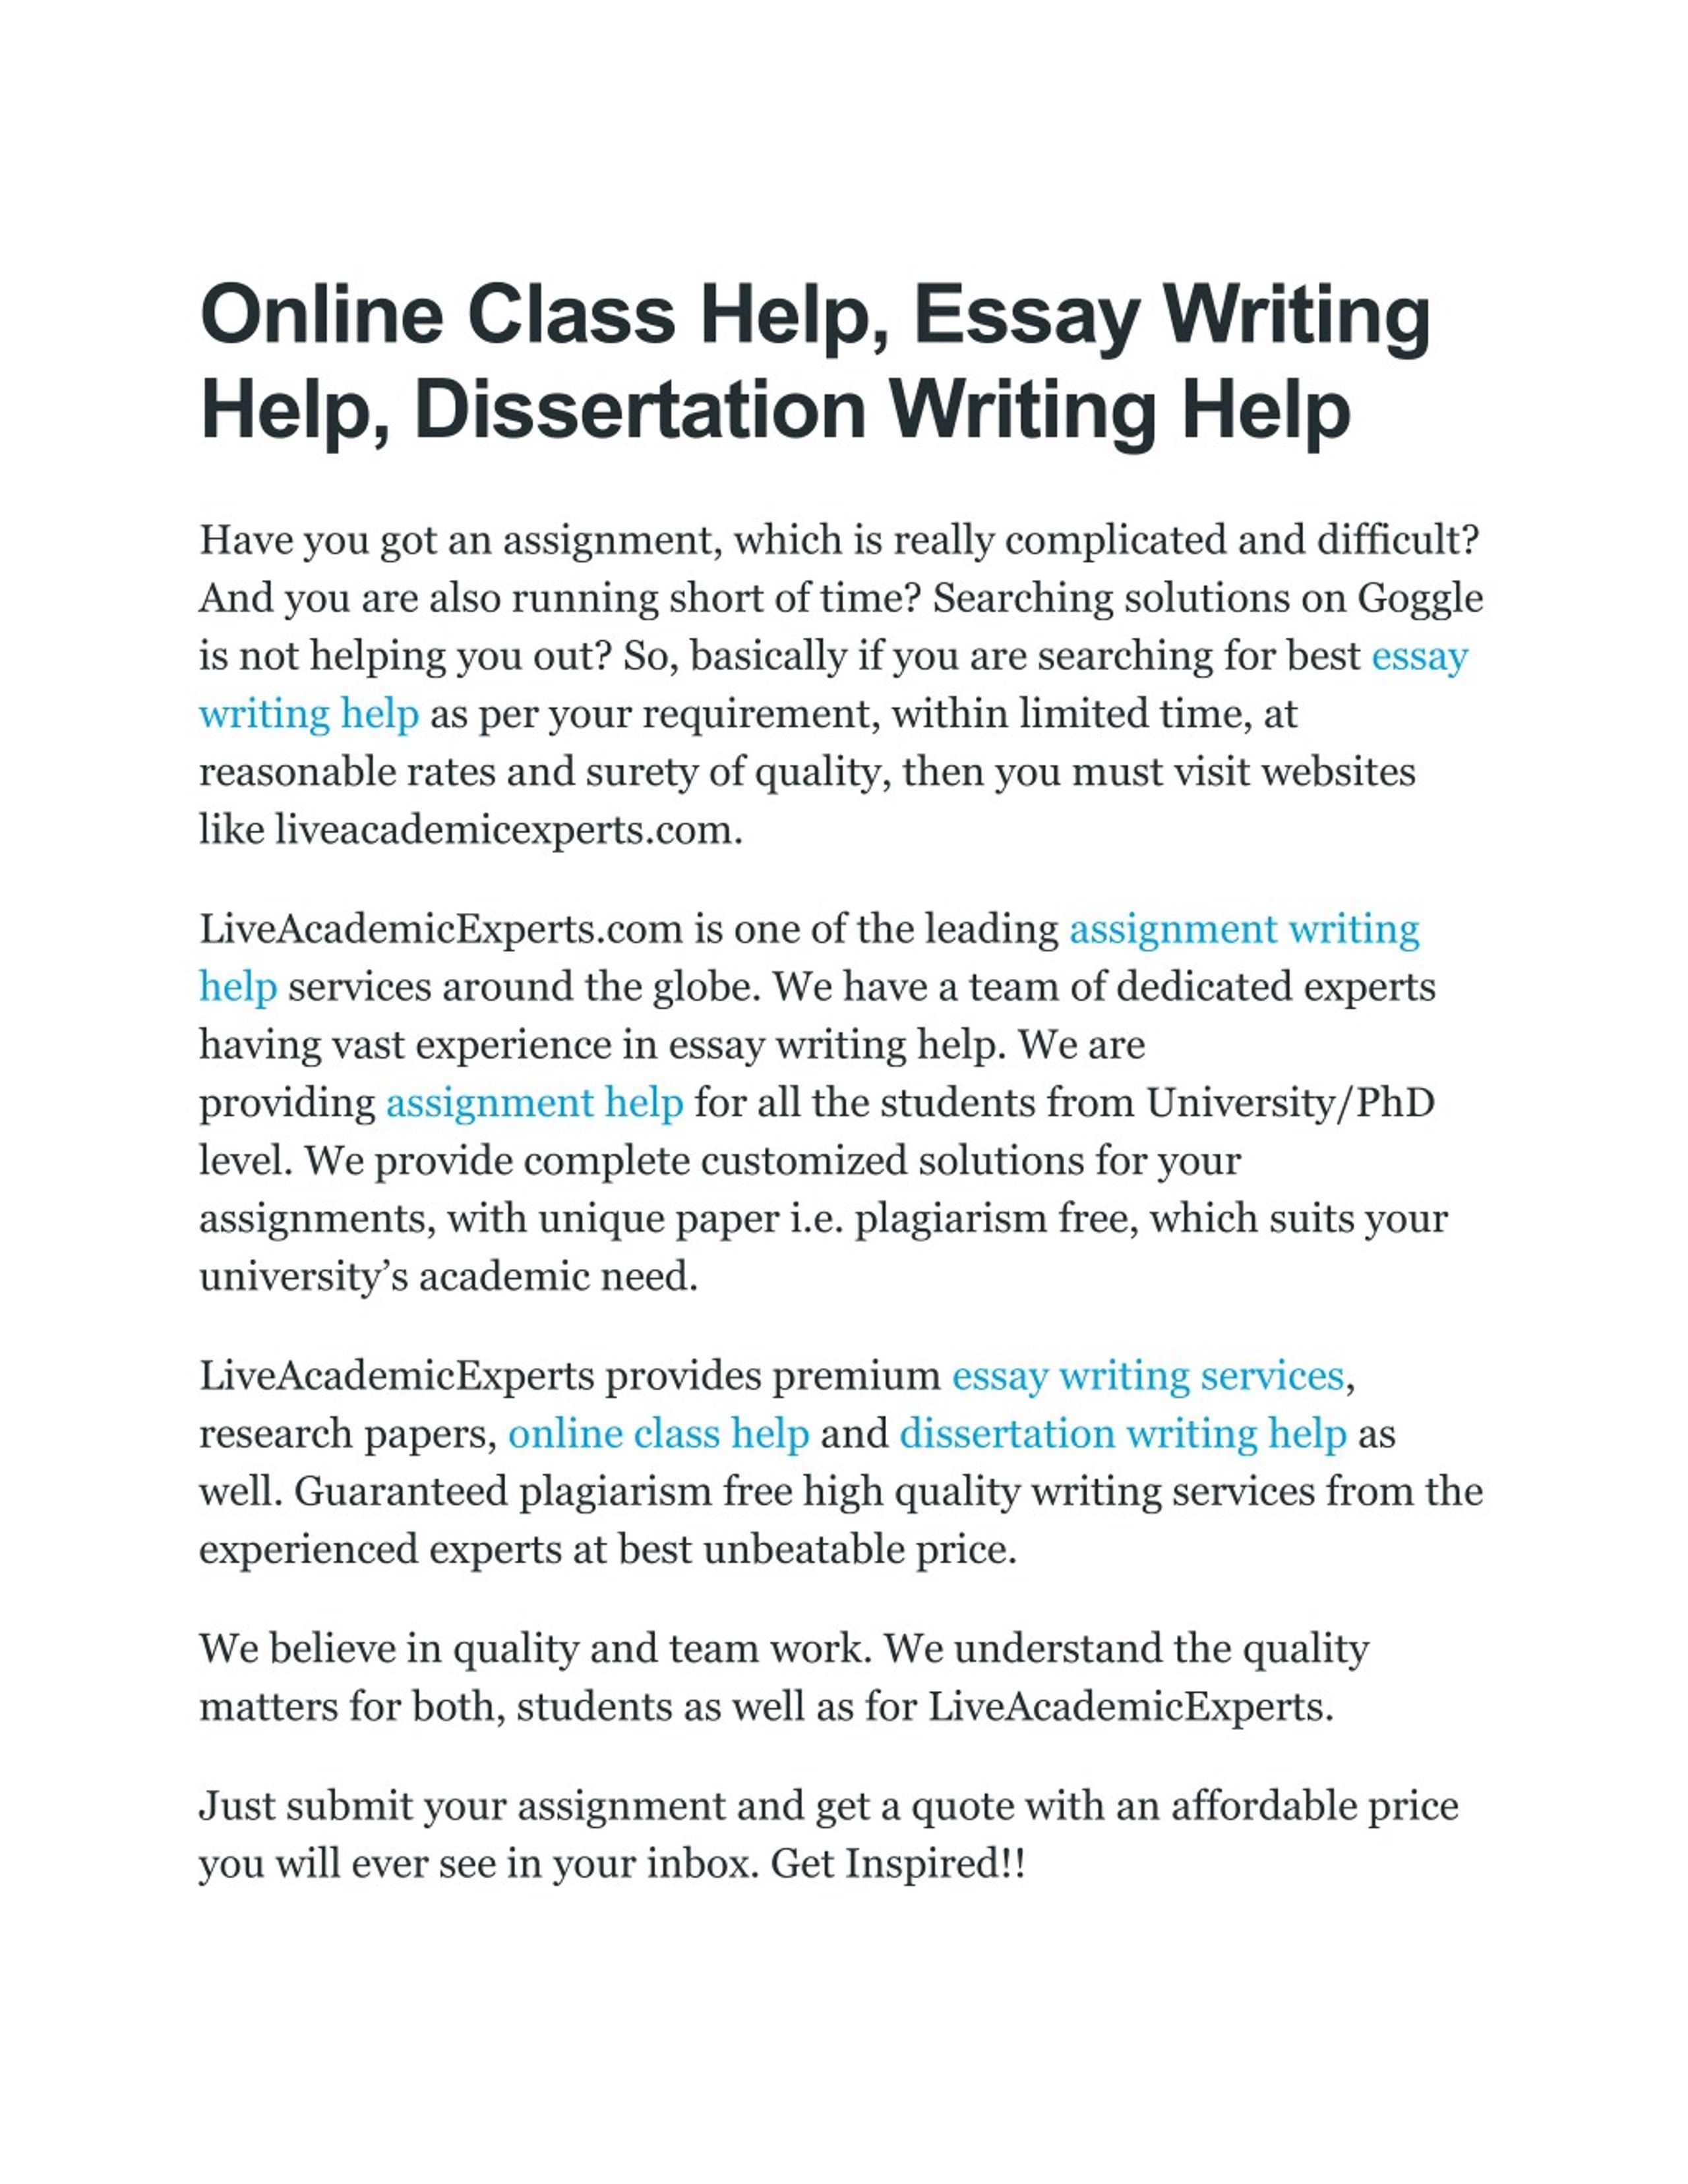 pay for essay: The Easy Way